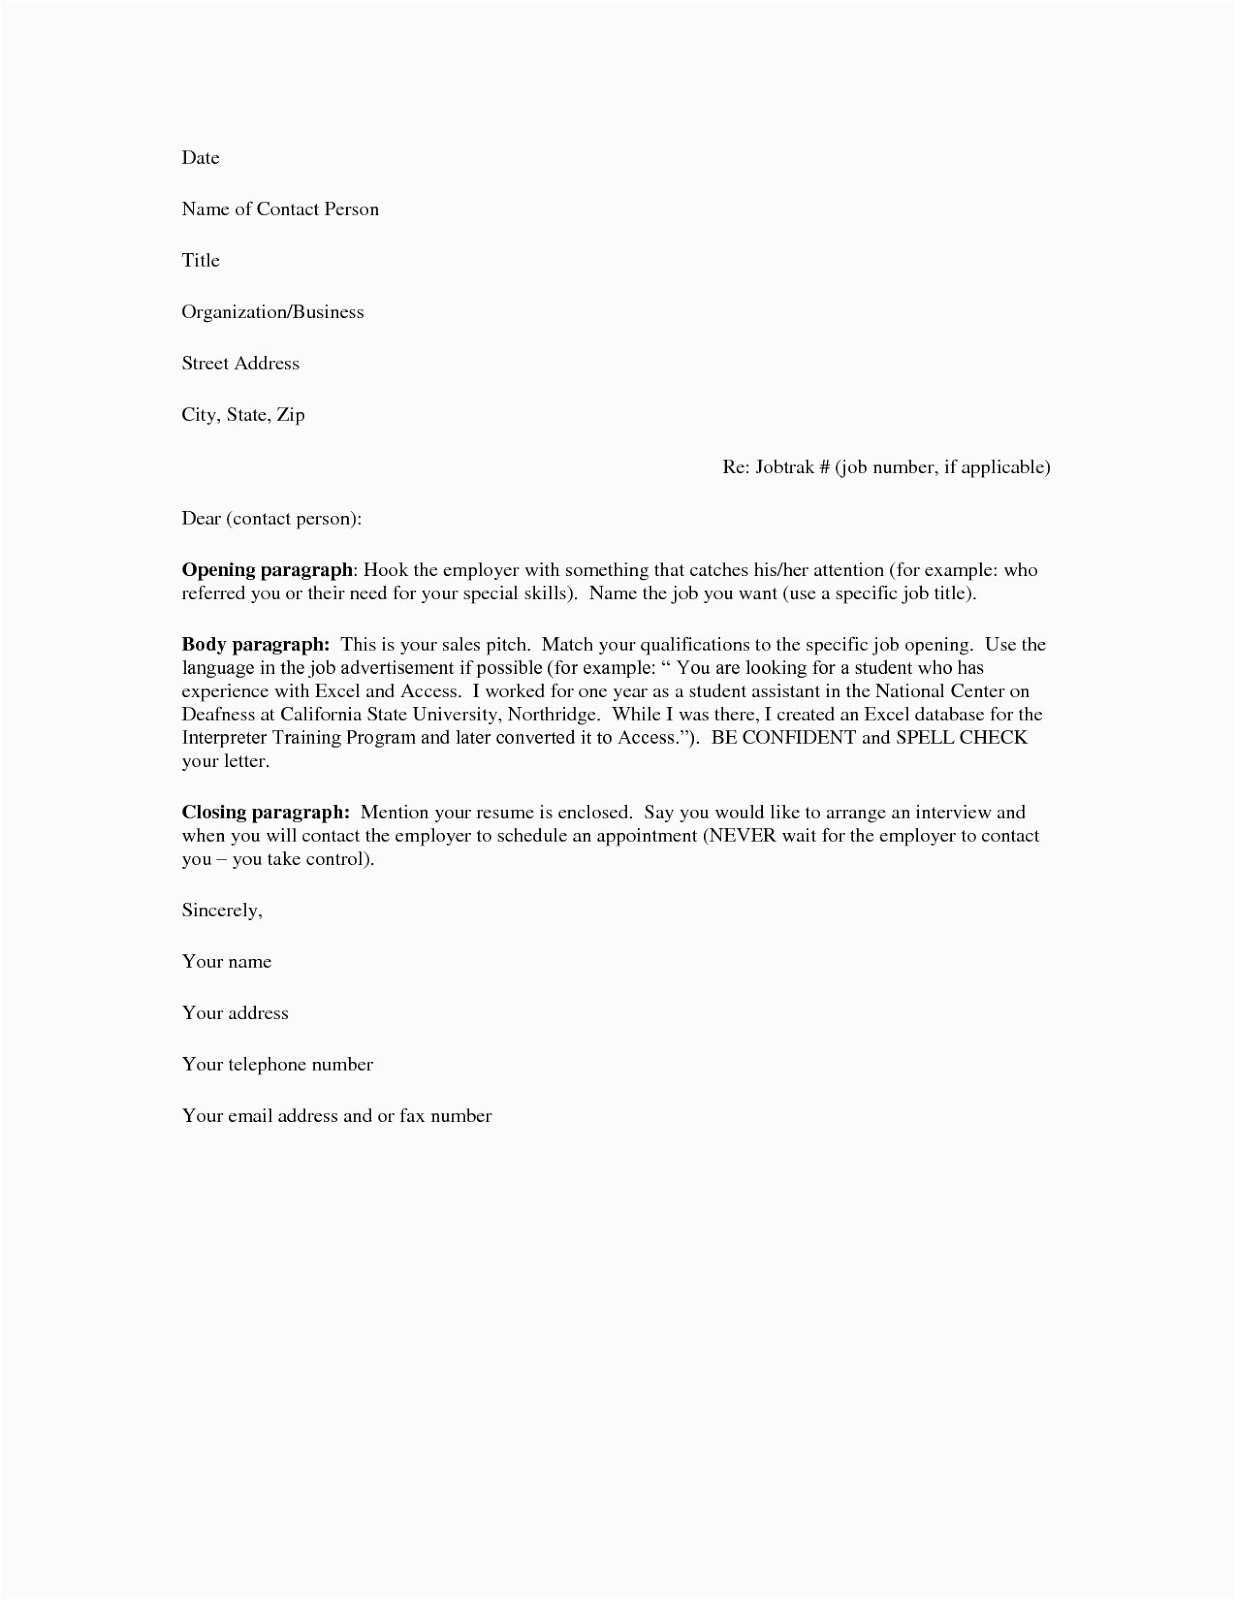 Free Online Resume Cover Letter Template Free Cover Letter Samples for Resumes